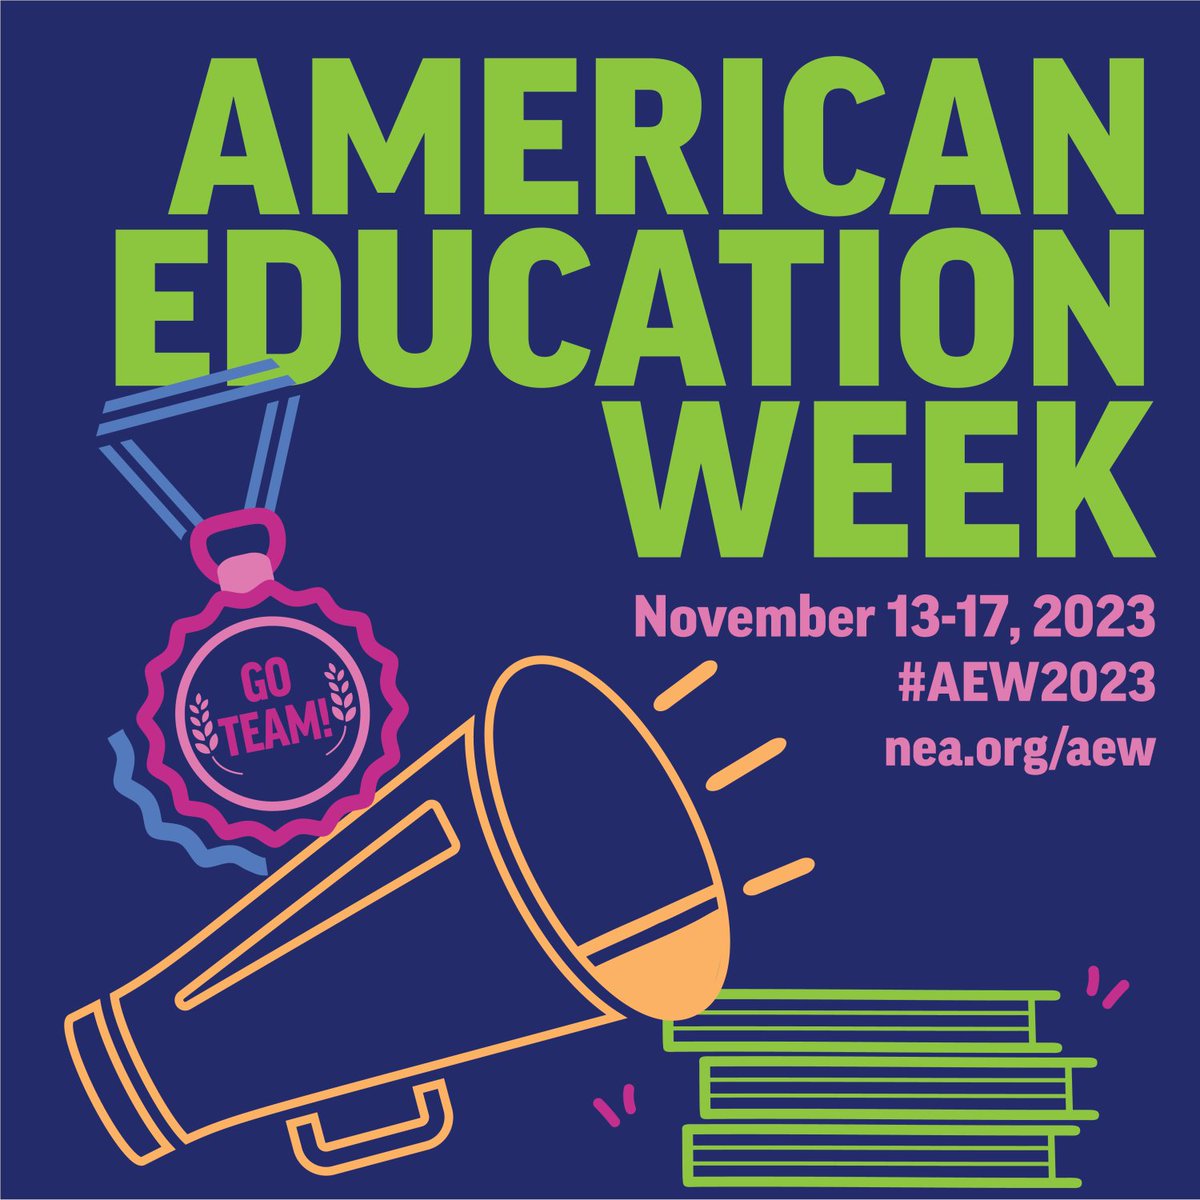 American Education Week provides a chance to show our gratitude for our entire Saline Area Schools team… from bus drivers to teachers to cafeteria workers and administrative staff, we are thankful for each of you.